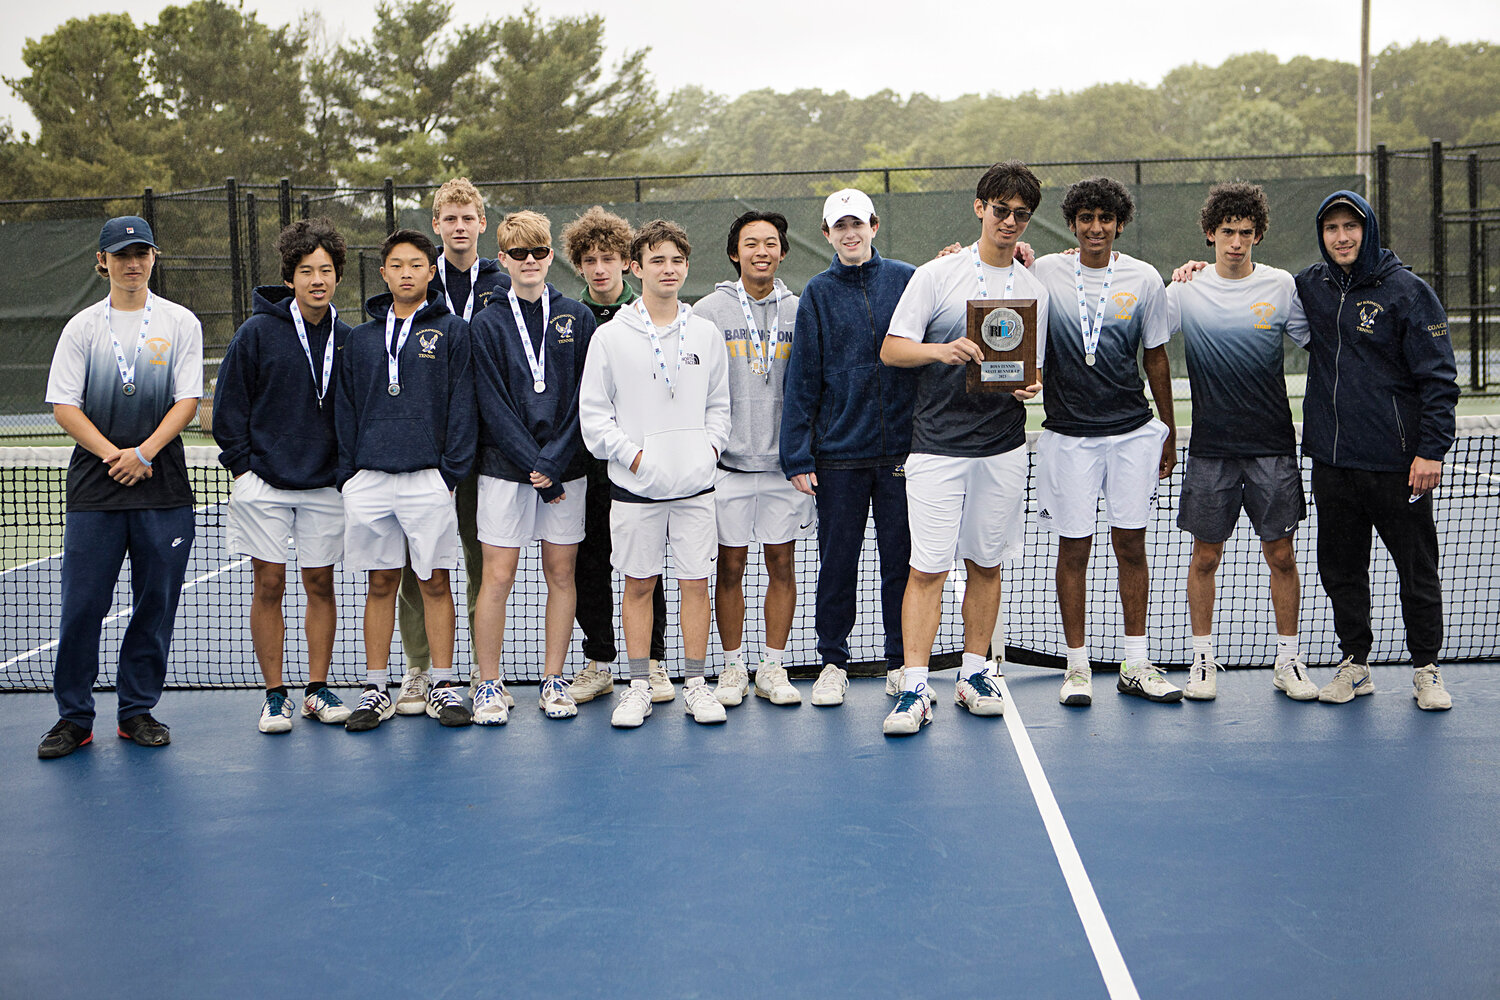 The Barrington boys tennis team gathers for a photo after losing to LaSalle in the Division I finals, Saturday.